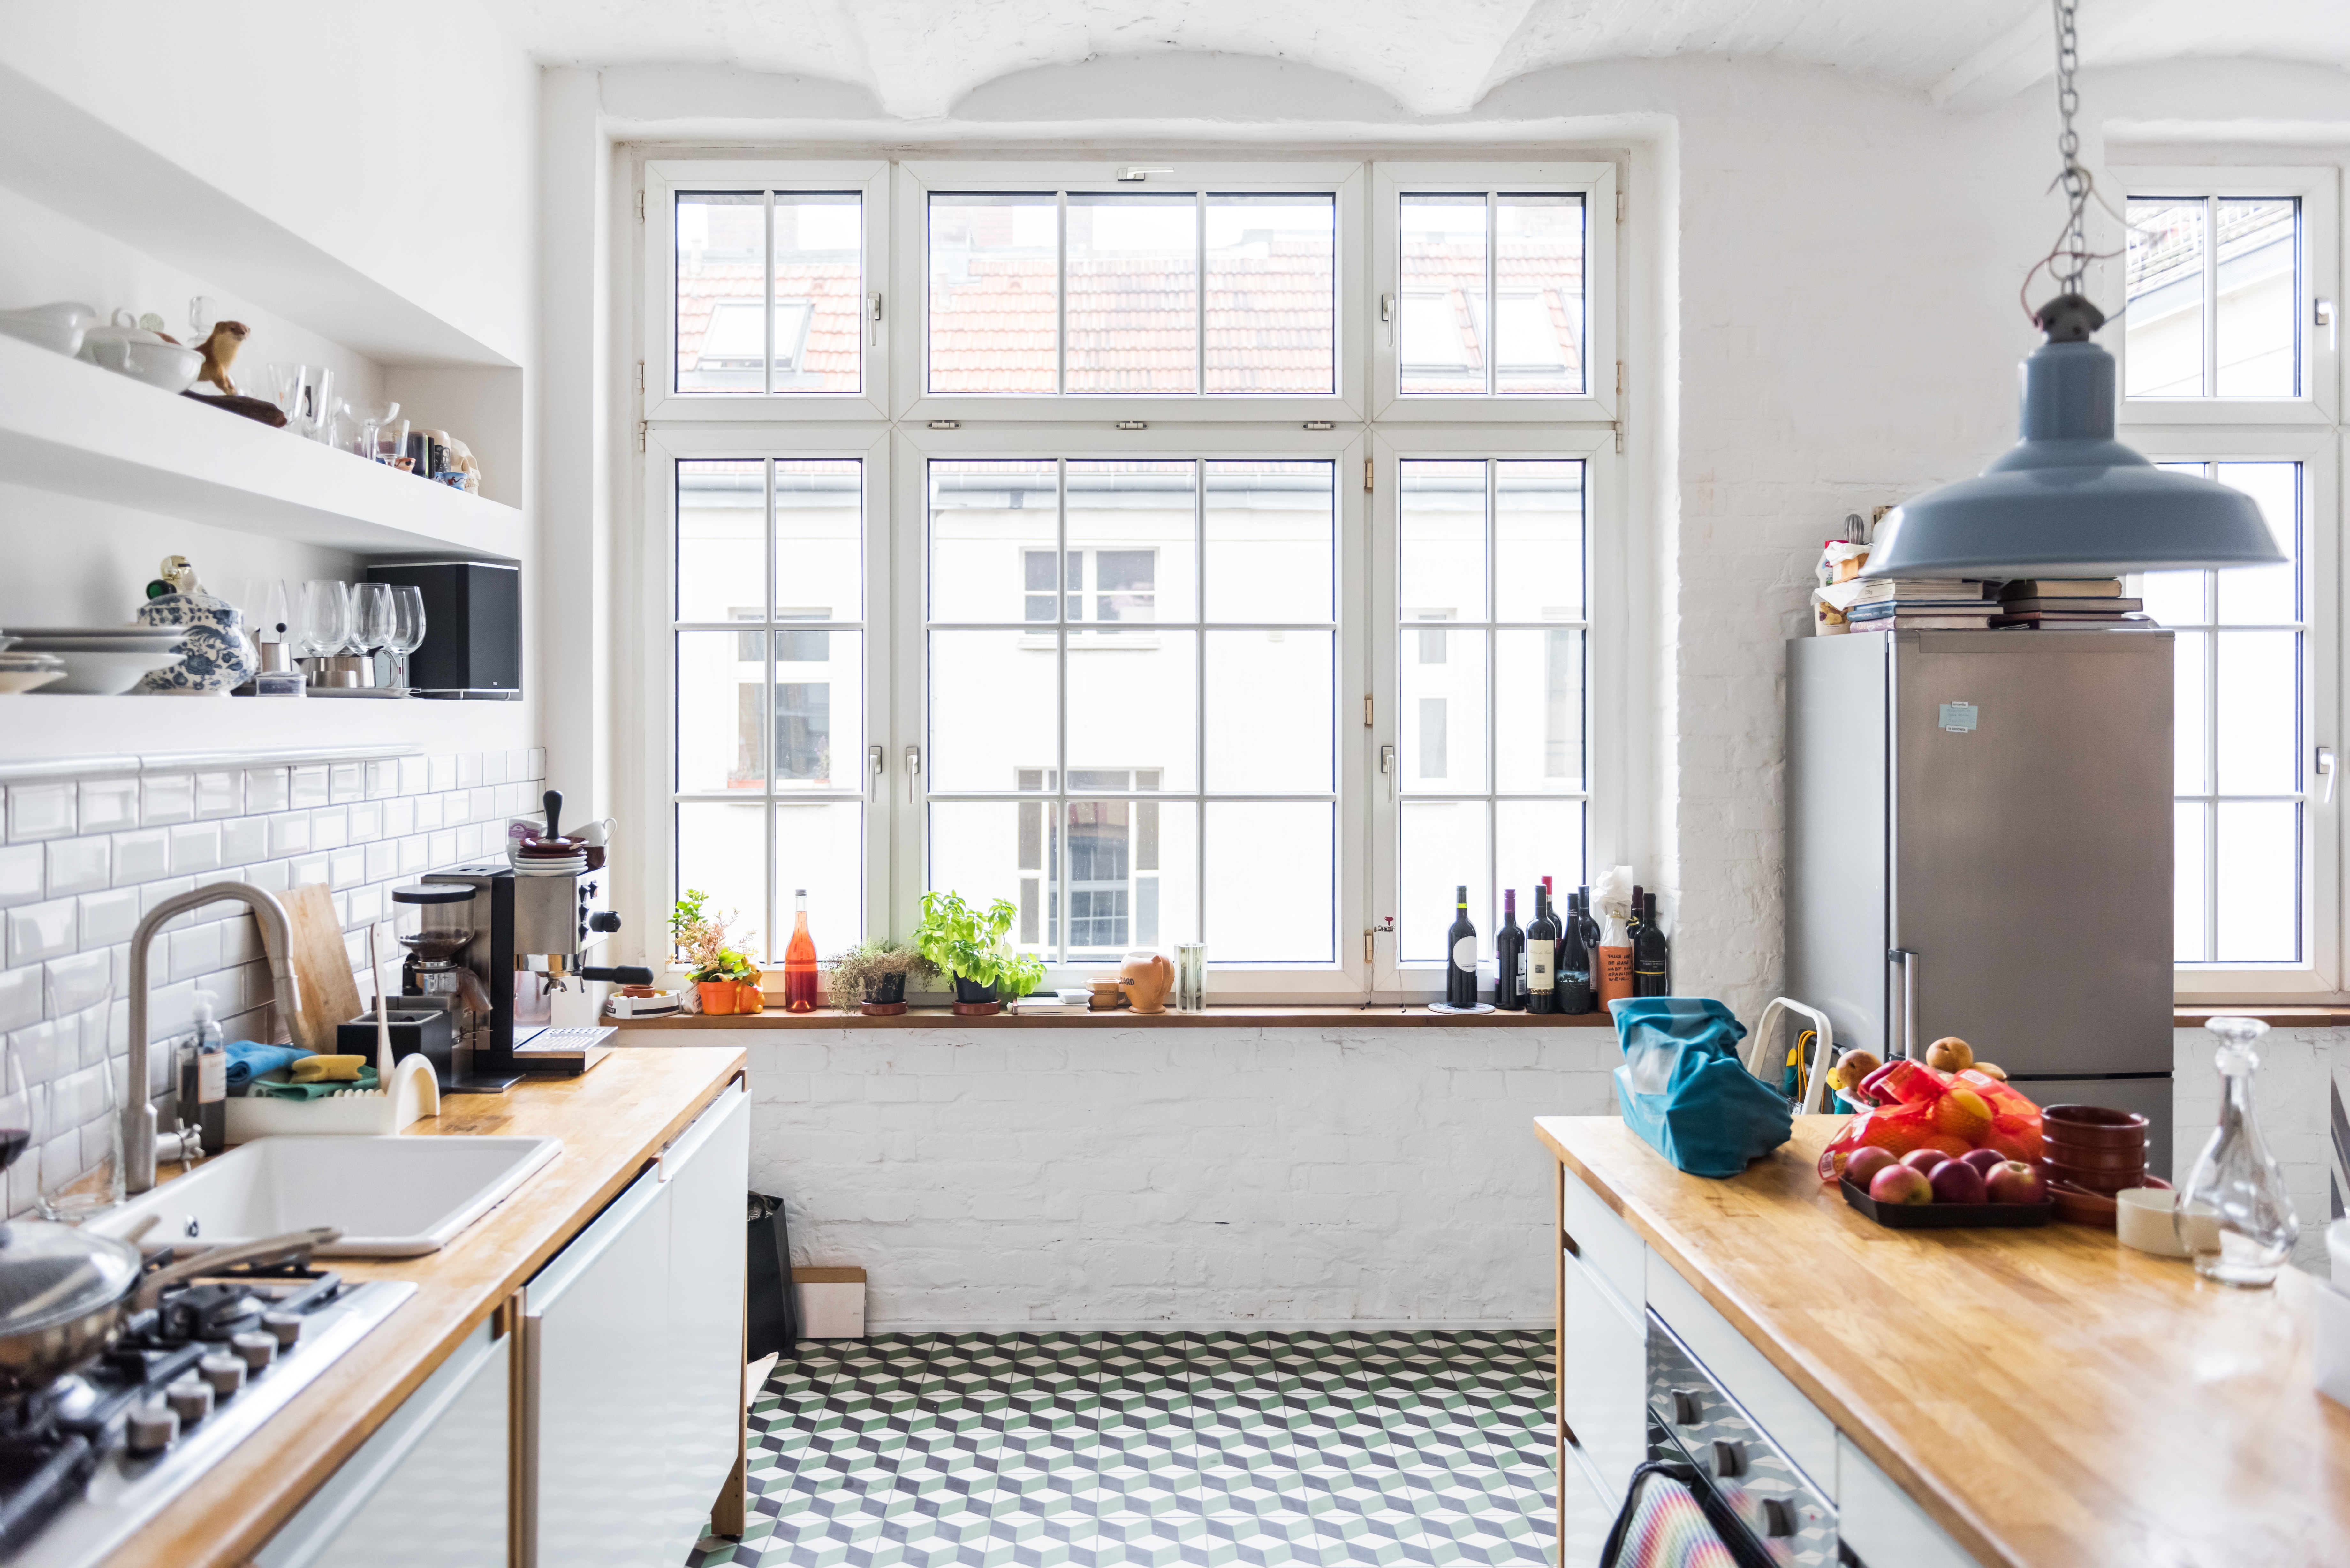 5 Easy Tips To Keep Your Kitchen Cool This Summer